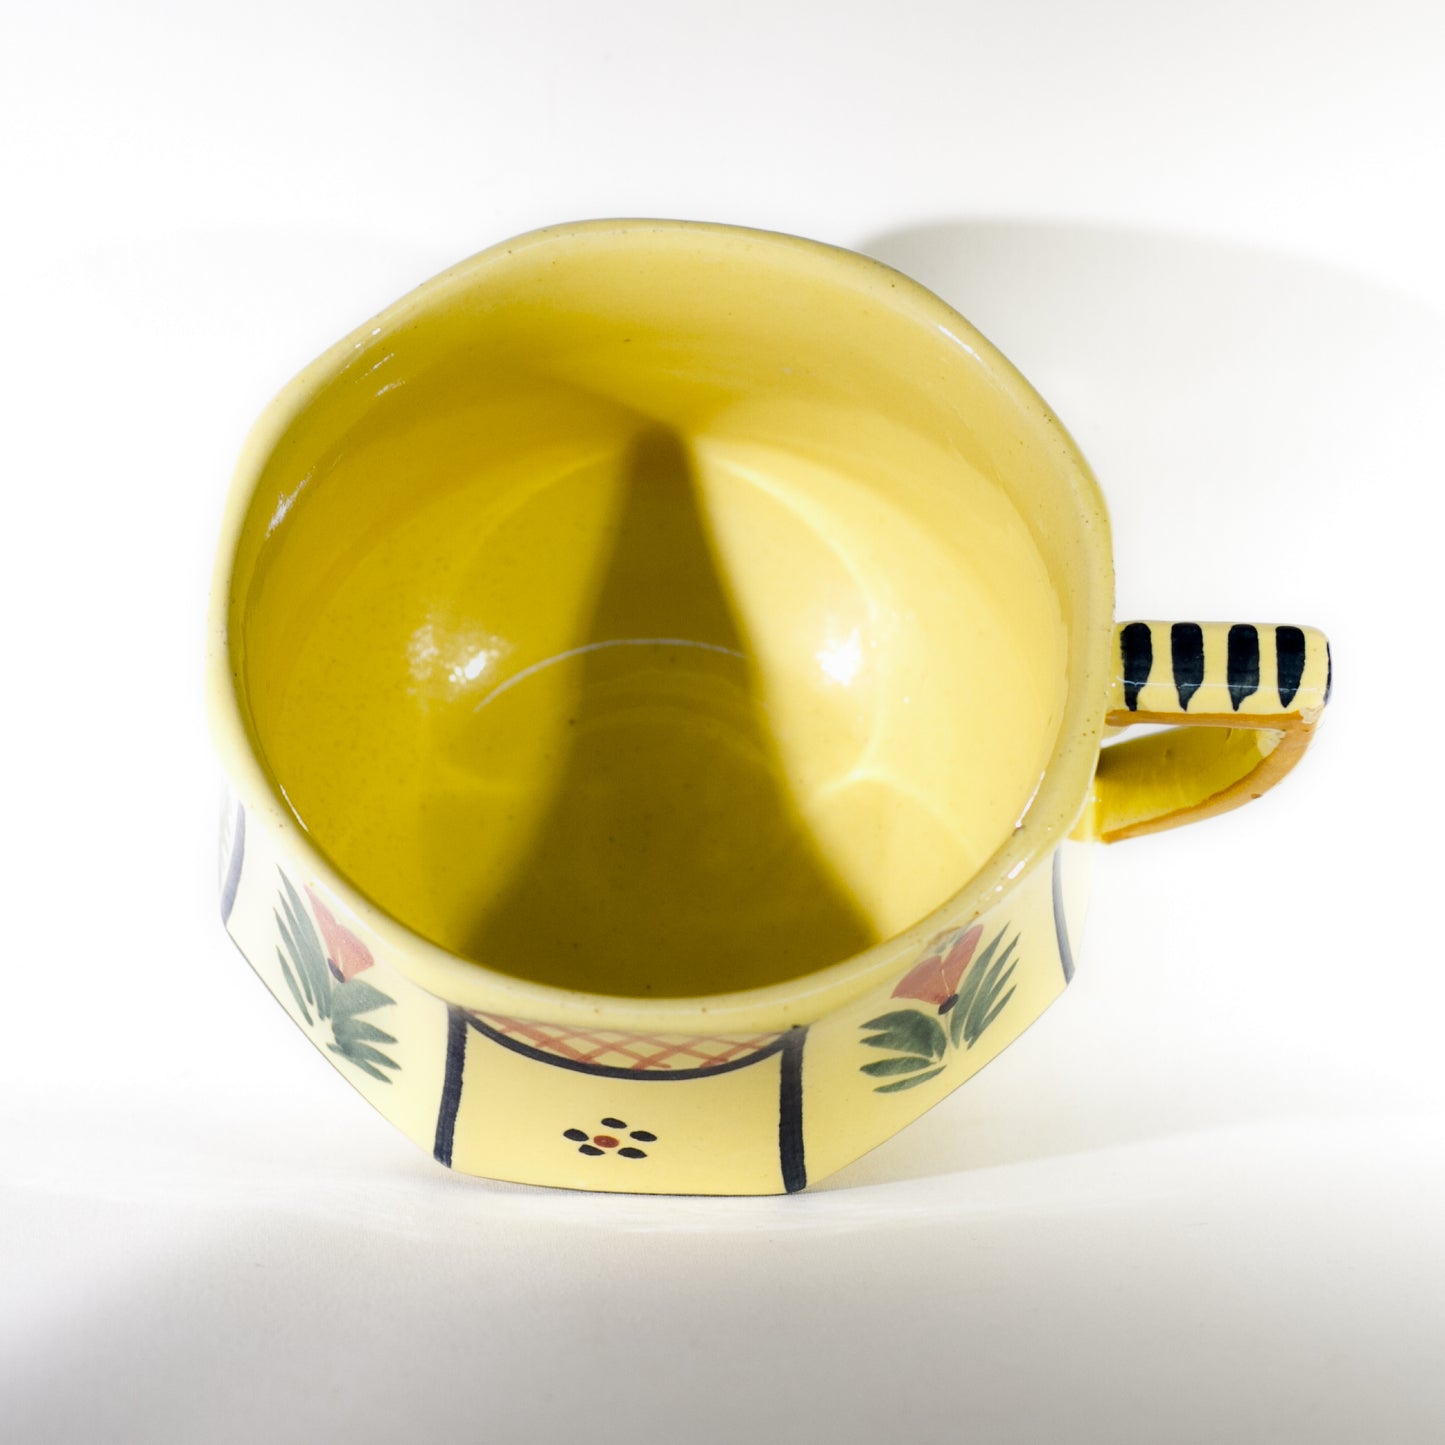 French Faïence HB QUIMPER OCTAGONAL Hand Painted FLAT CUP Circa 1940 - 1960